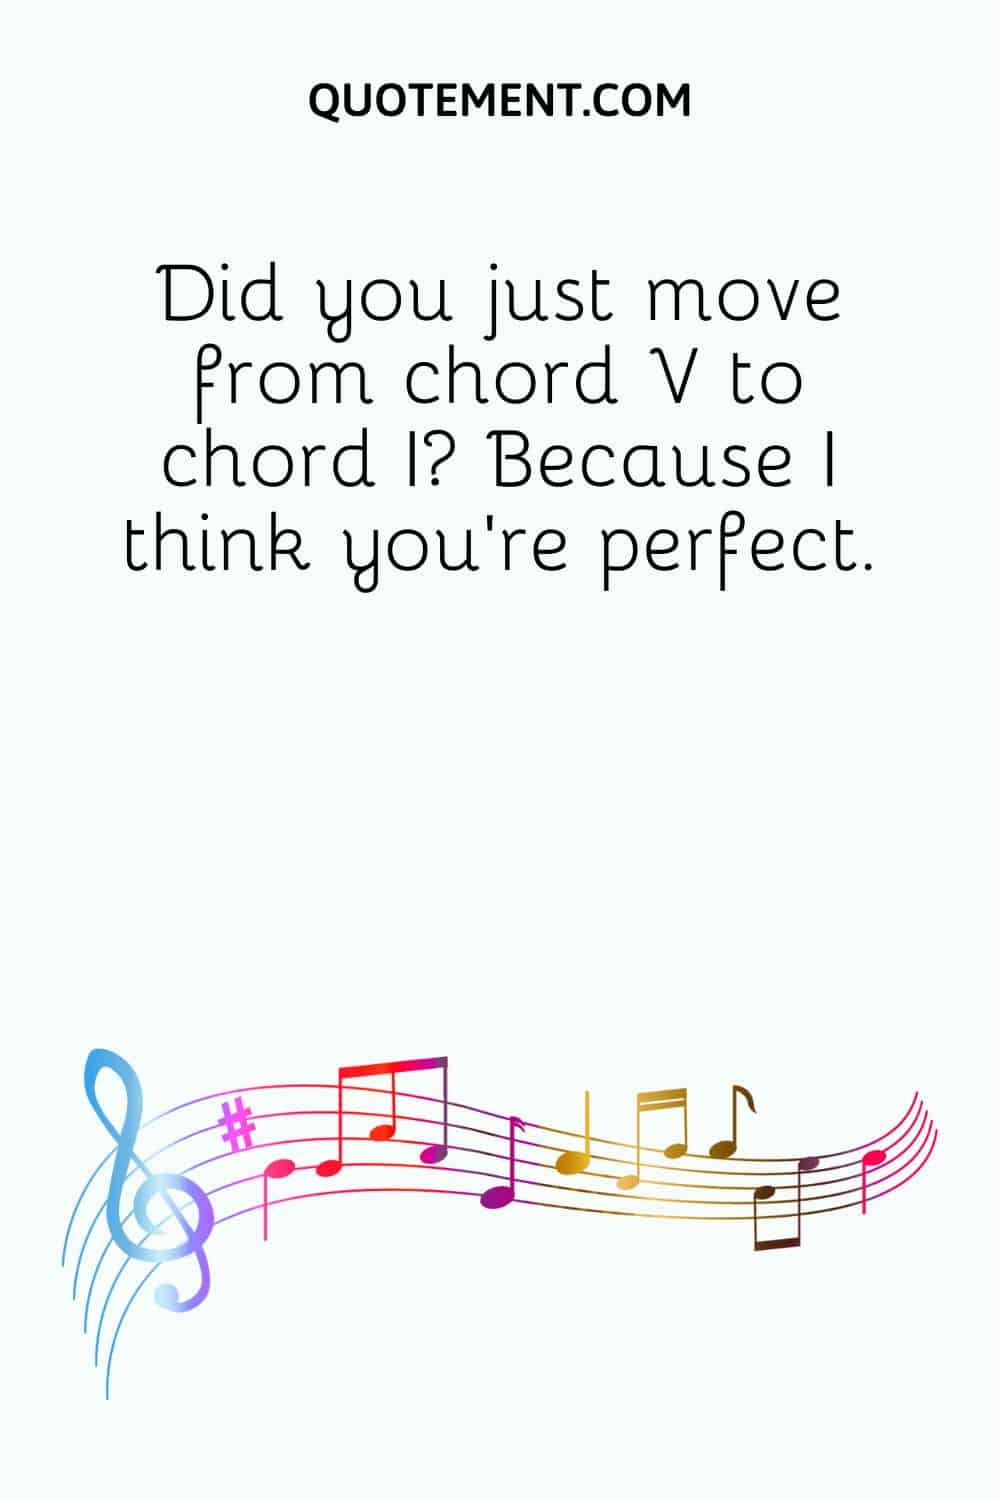 Did you just move from chord V to chord I Because I think you're perfect